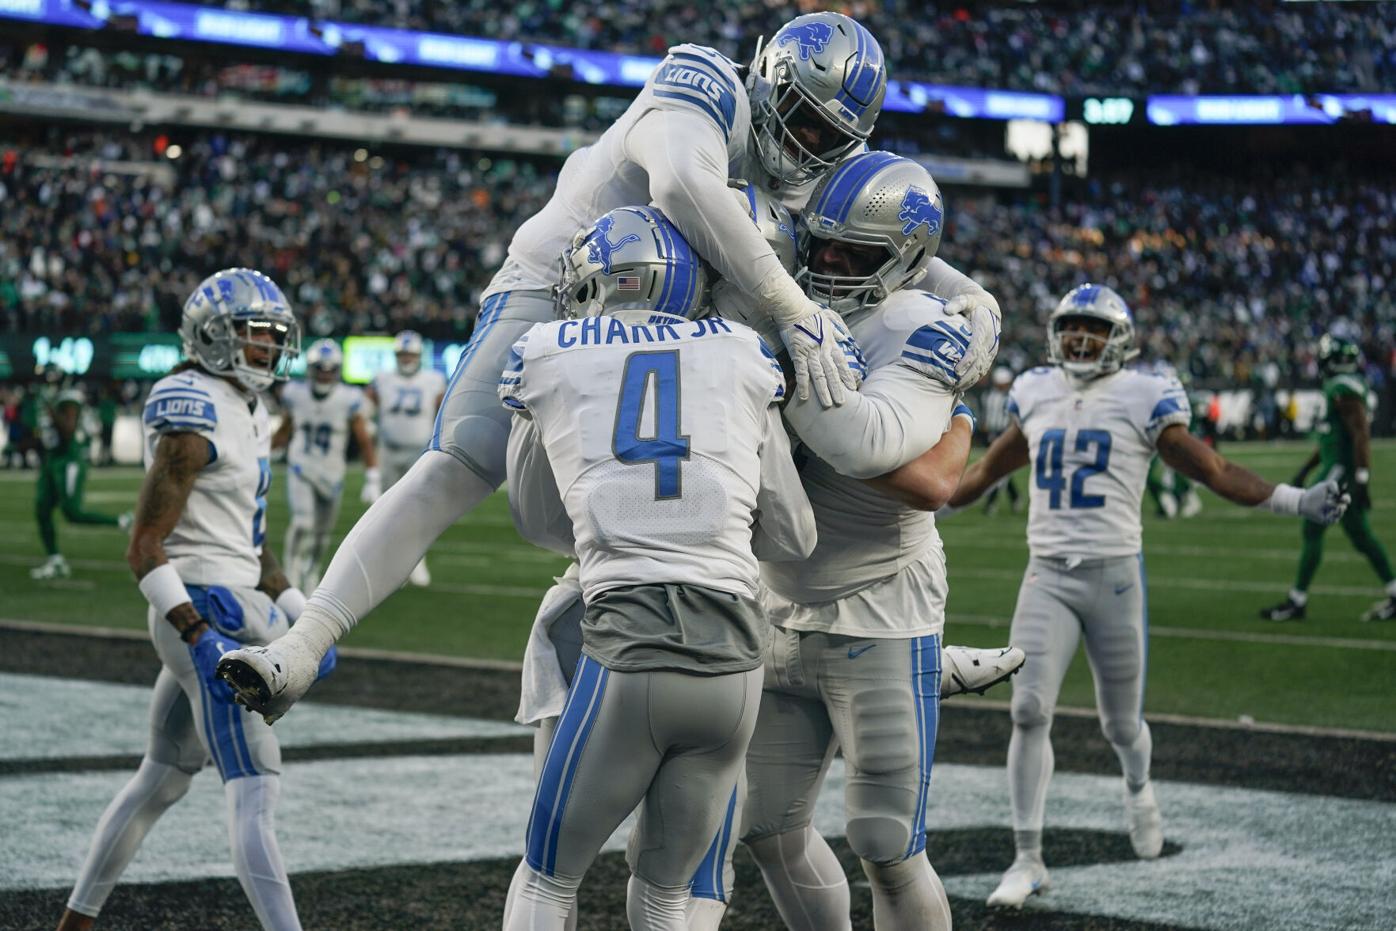 Jets defense folds in loss to Lions with playoff hopes teetering